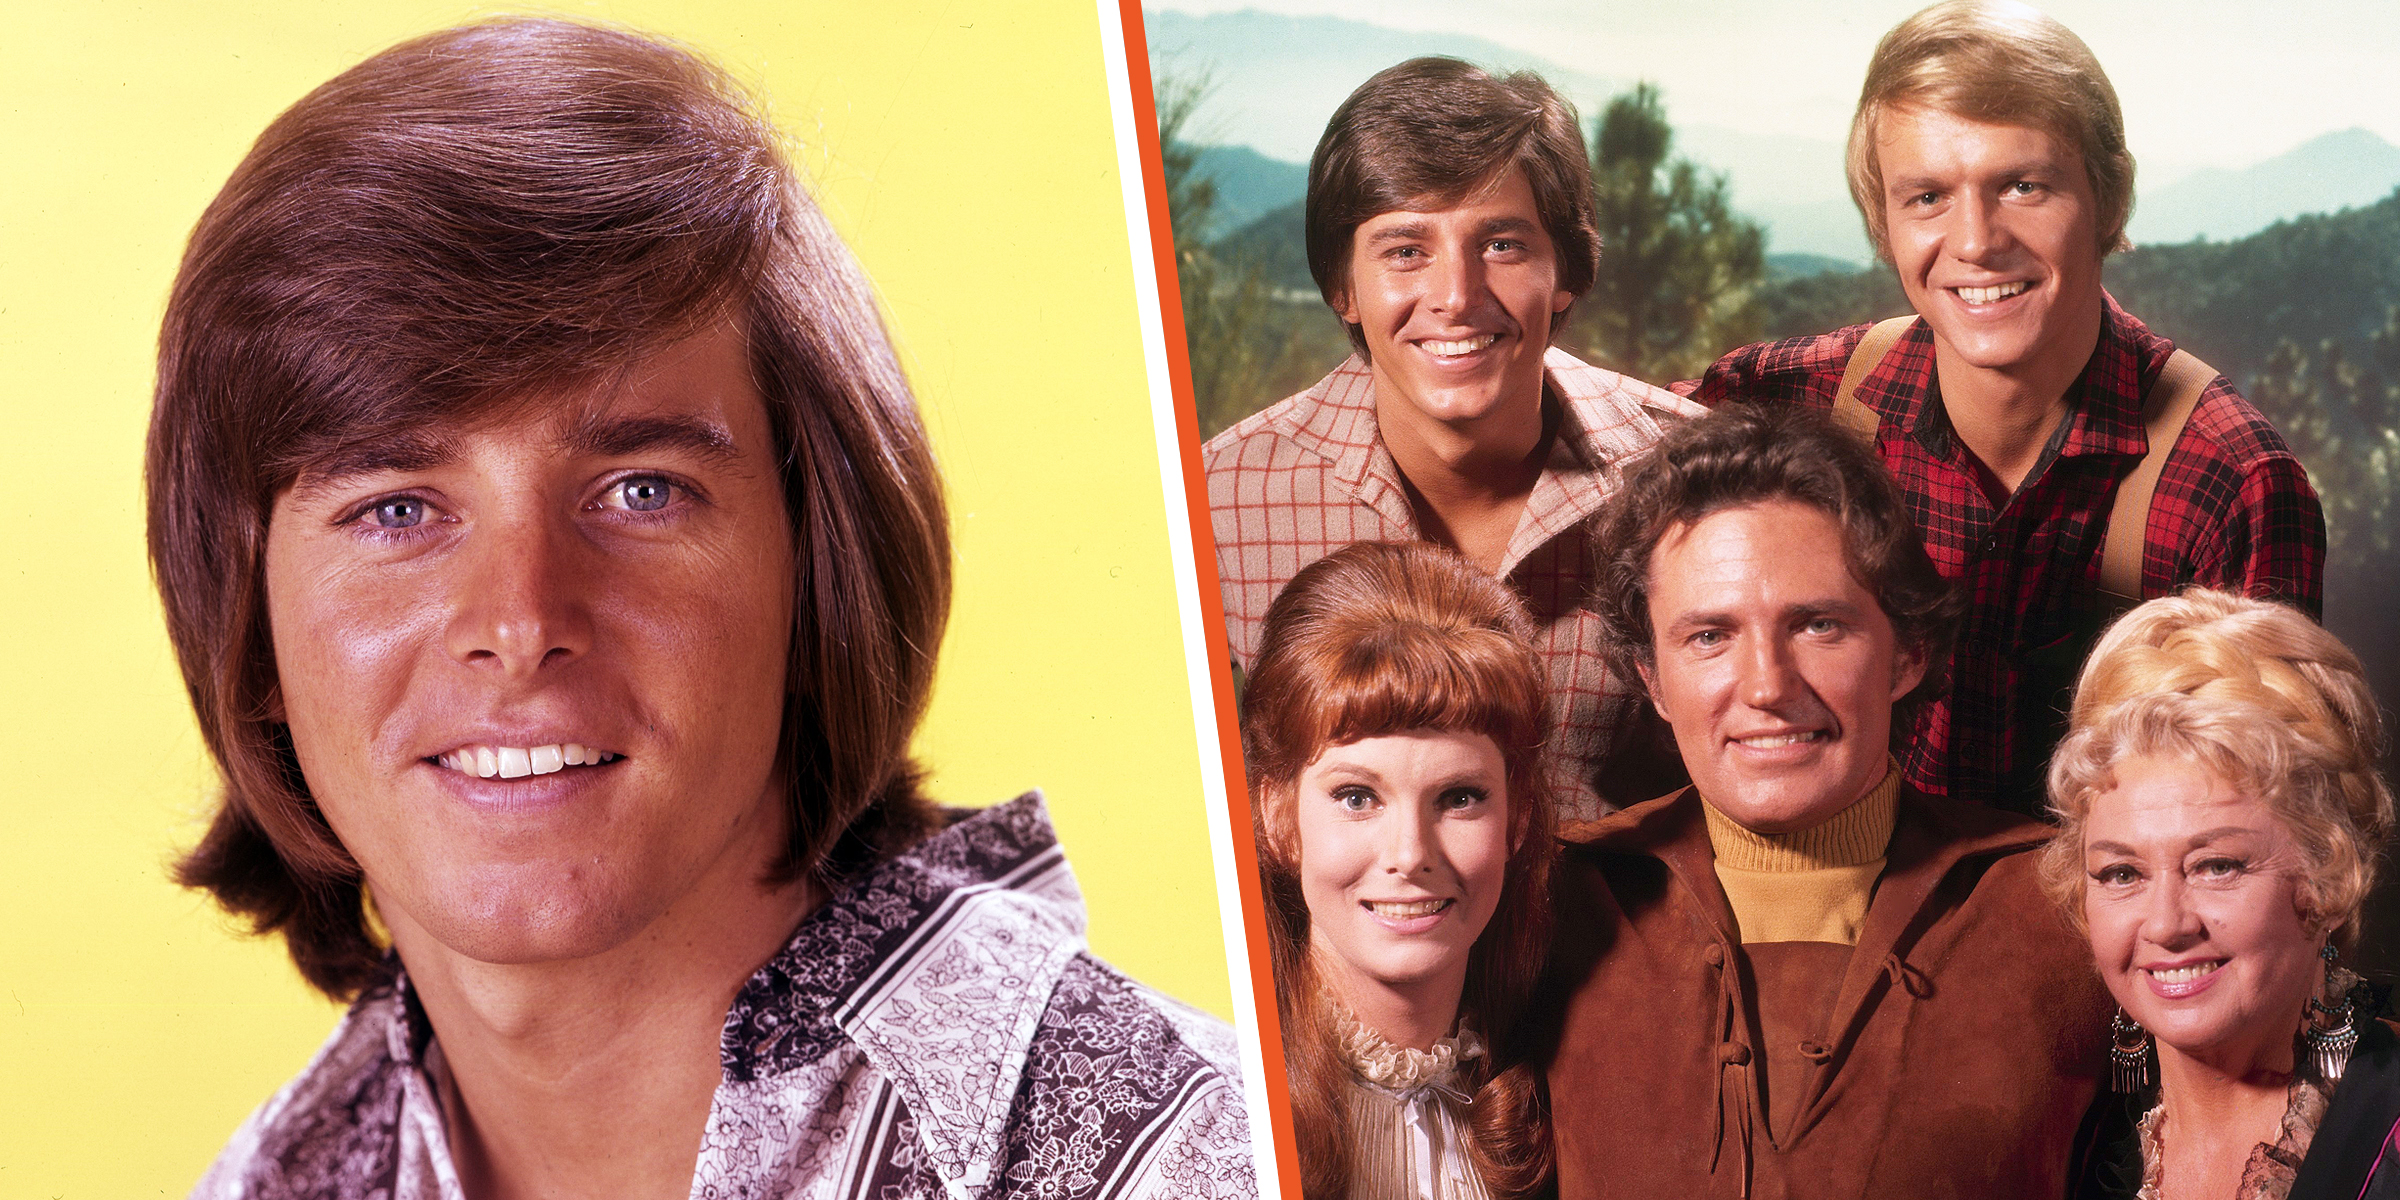 Bobby Sherman and the stars of "Here Comes the Bride" | Source: | Getty Images